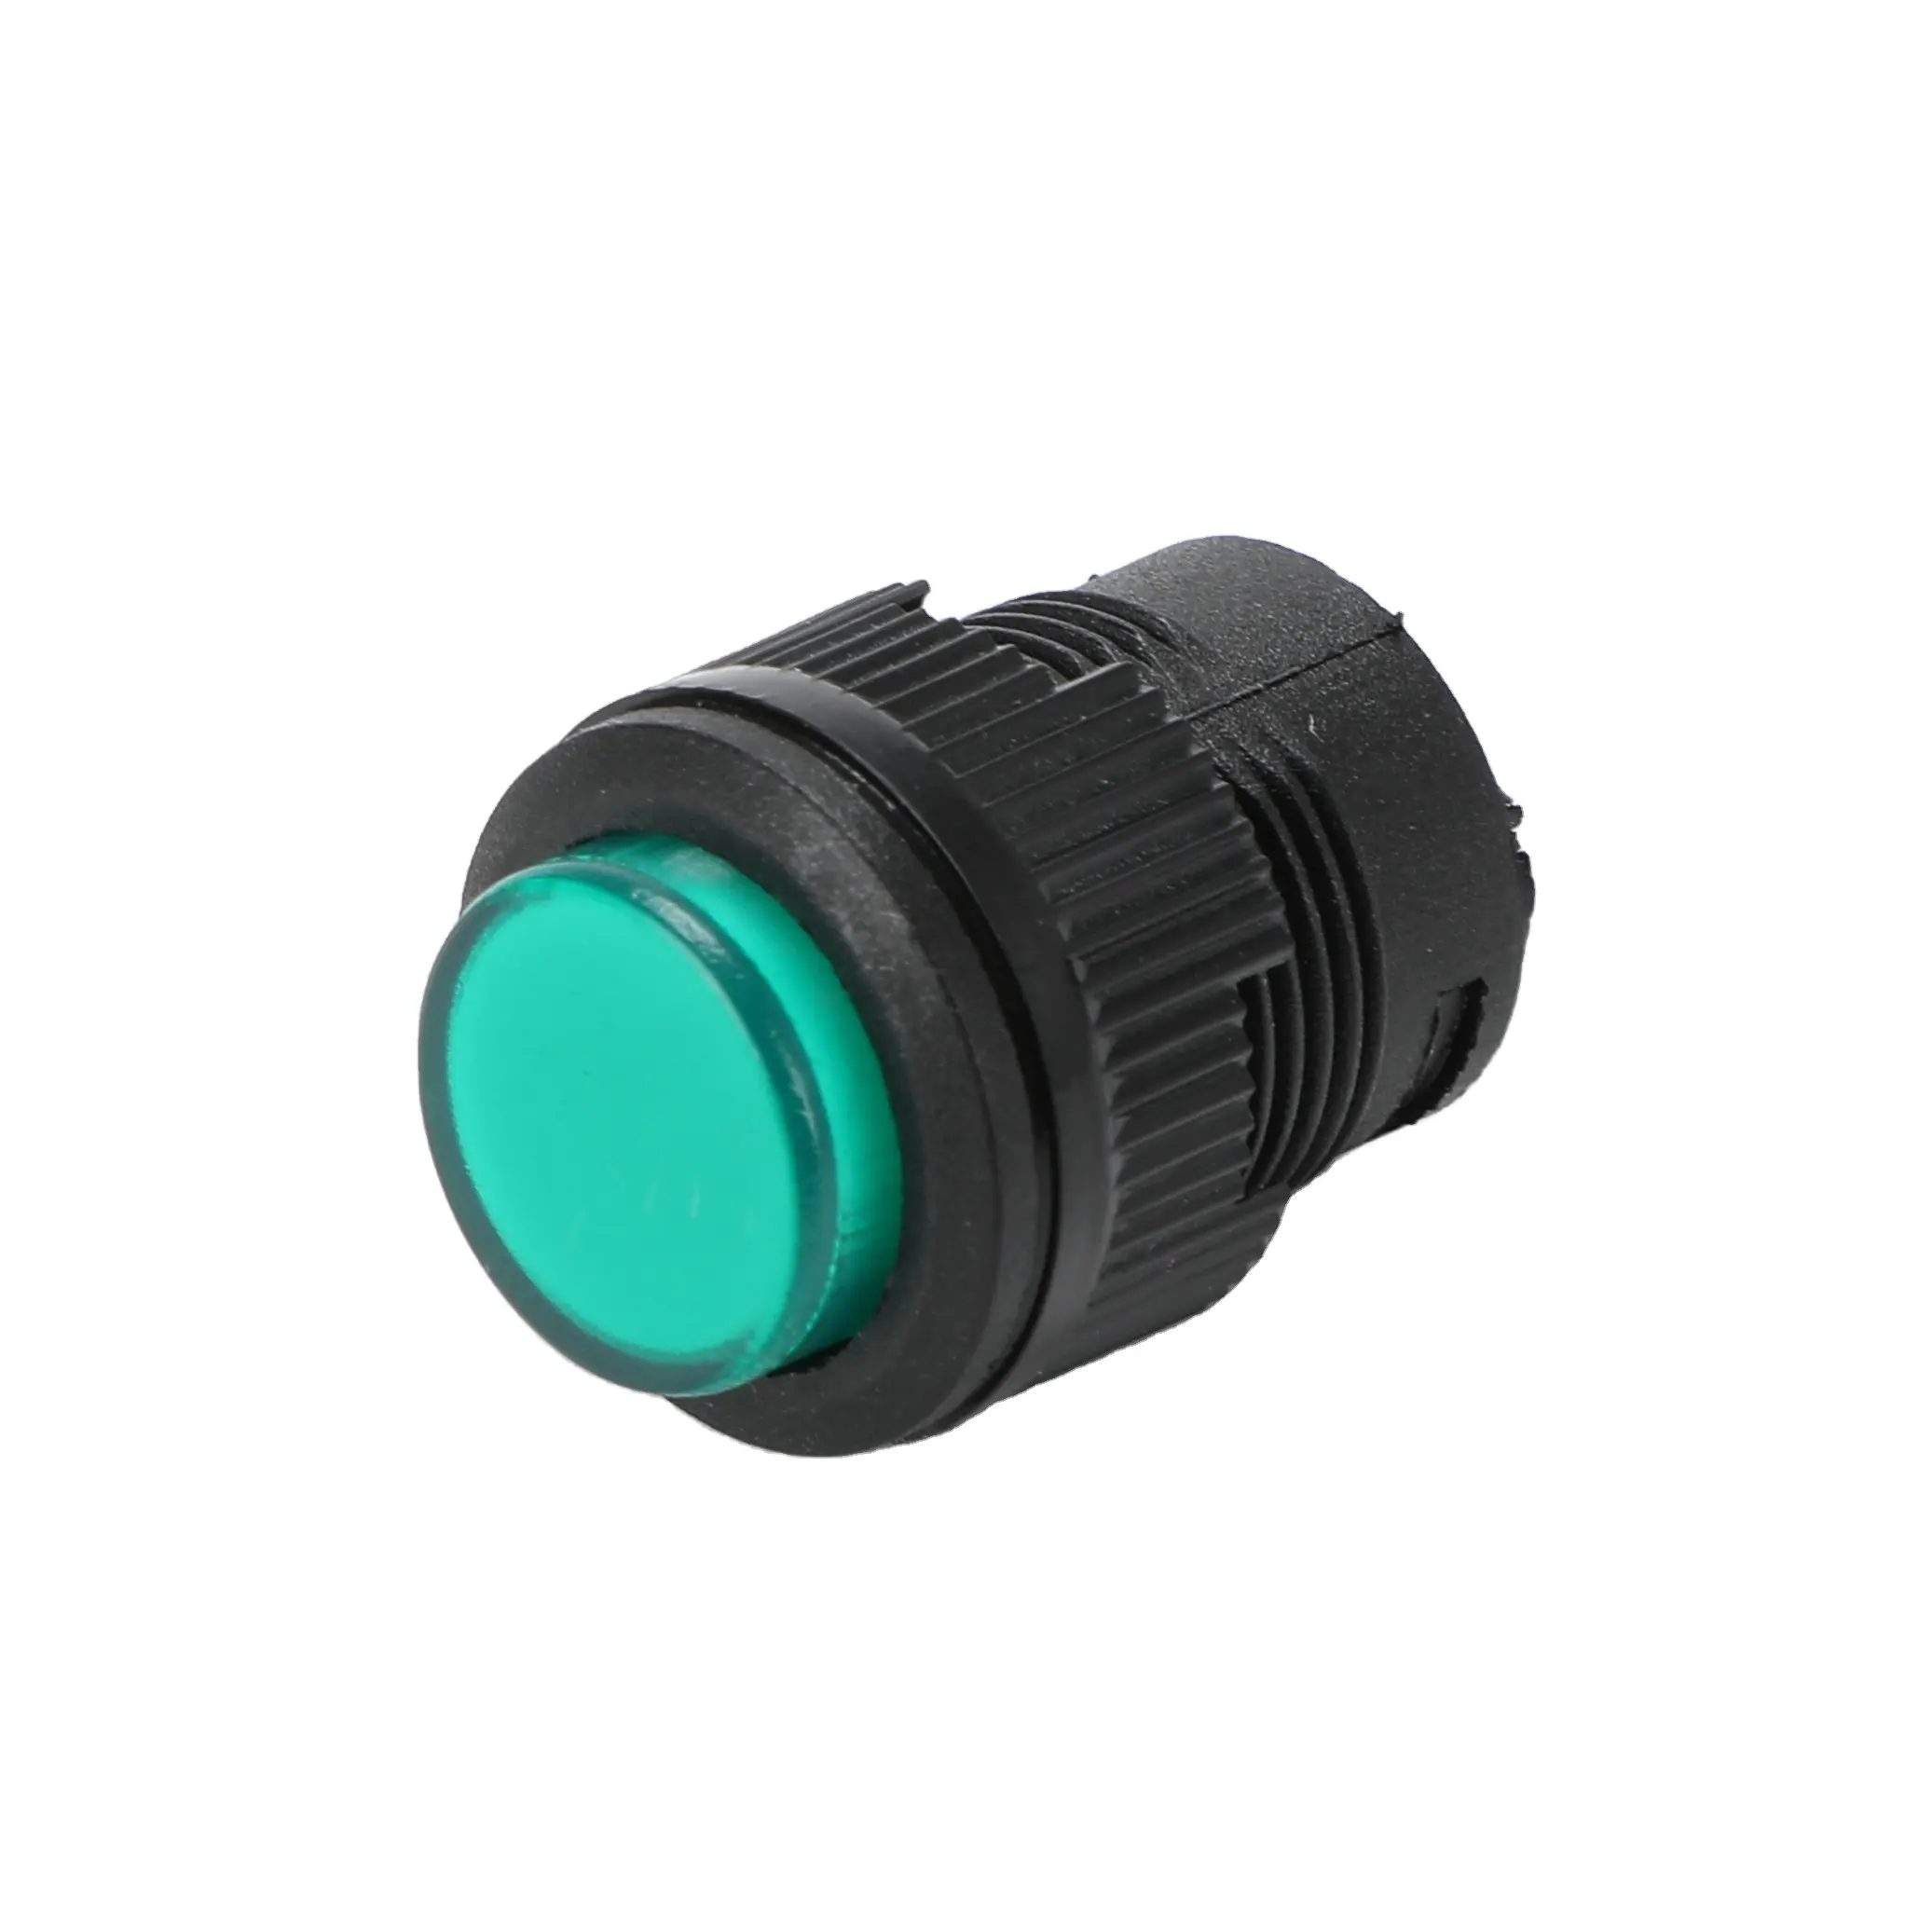 XCE 16mm Momentary/Latching 1NO Plastic Push Button Switch With LED Light Illumination 3A 250VAC 2 Pin Terminal R16-503